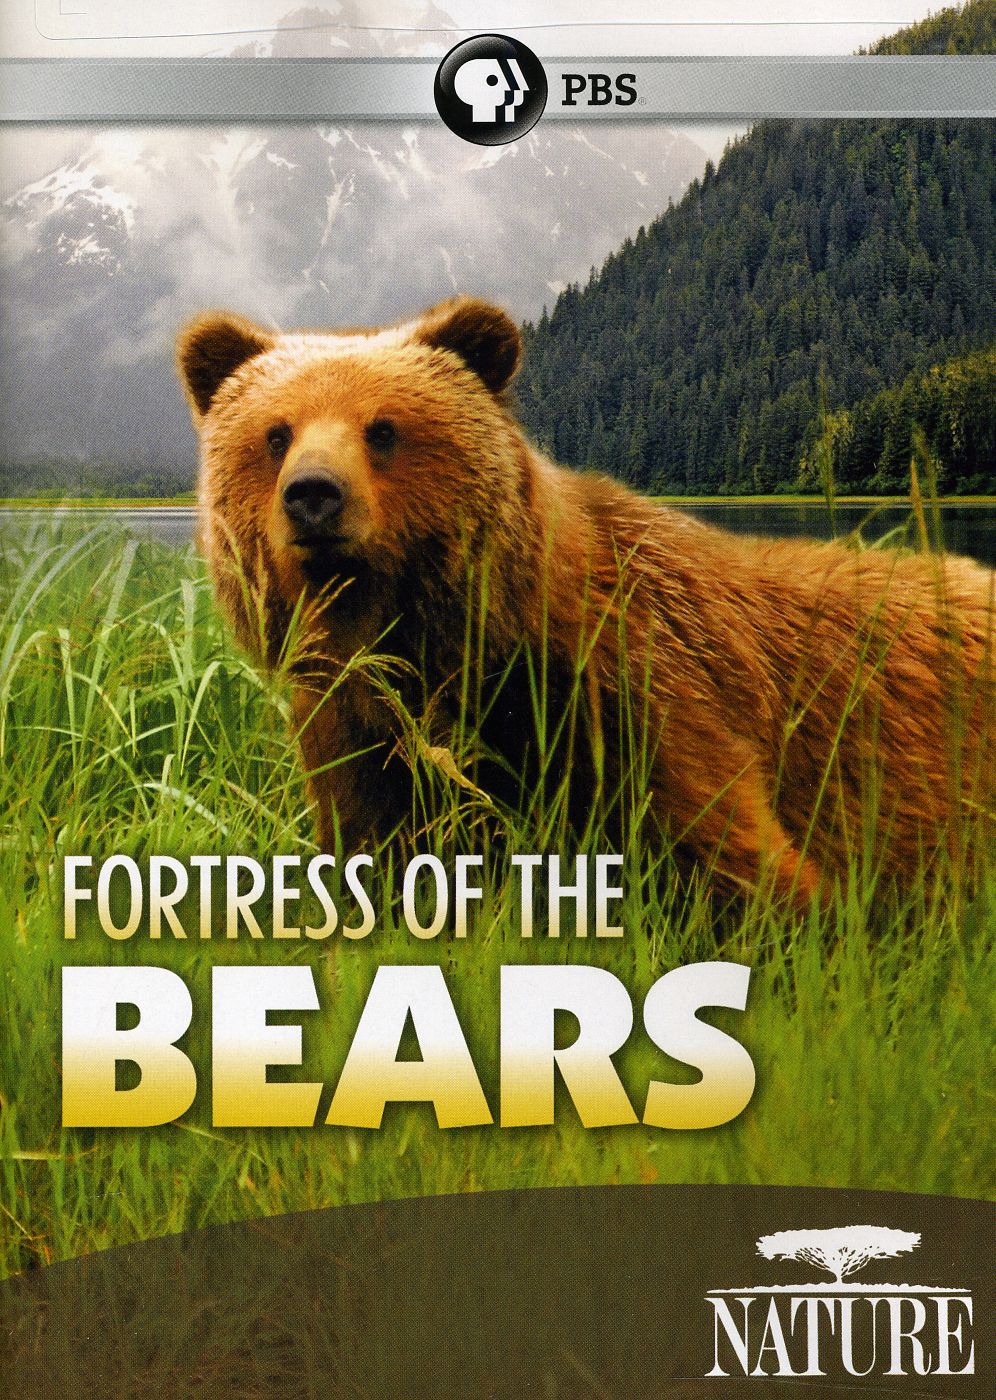 NATURE: FORTRESS OF THE BEARS